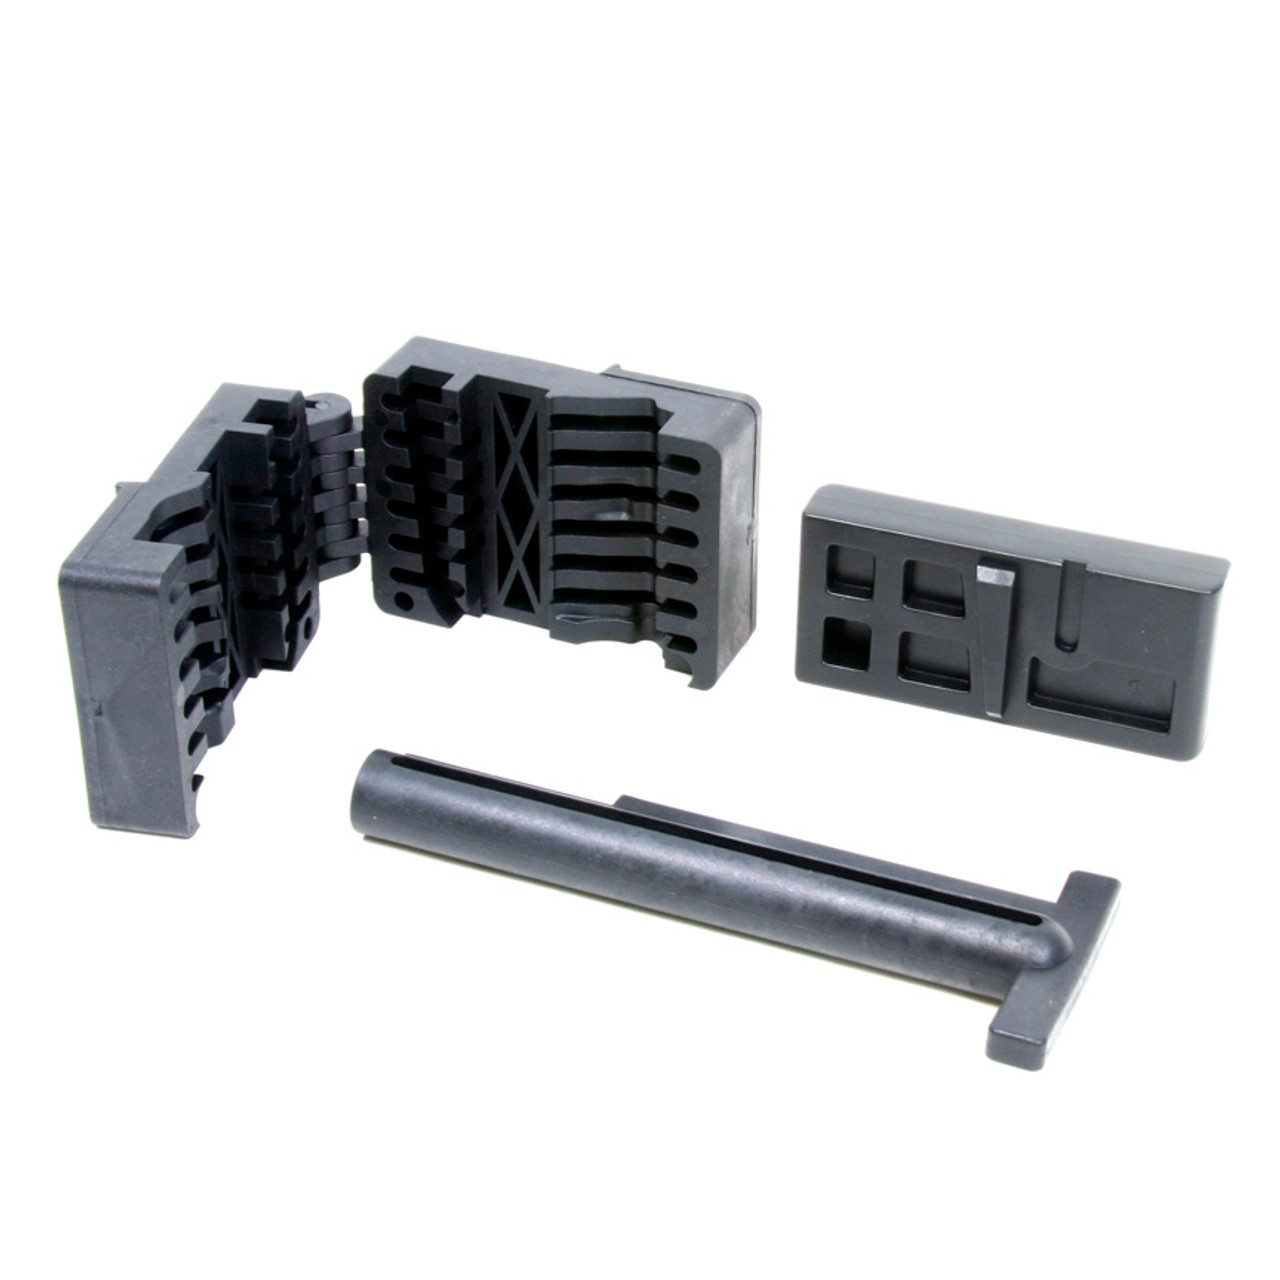 AR-15® / M16 Upper and Lower Receiver Magazine Well Vise Block Set - Black  Polymer - ProMag Industries